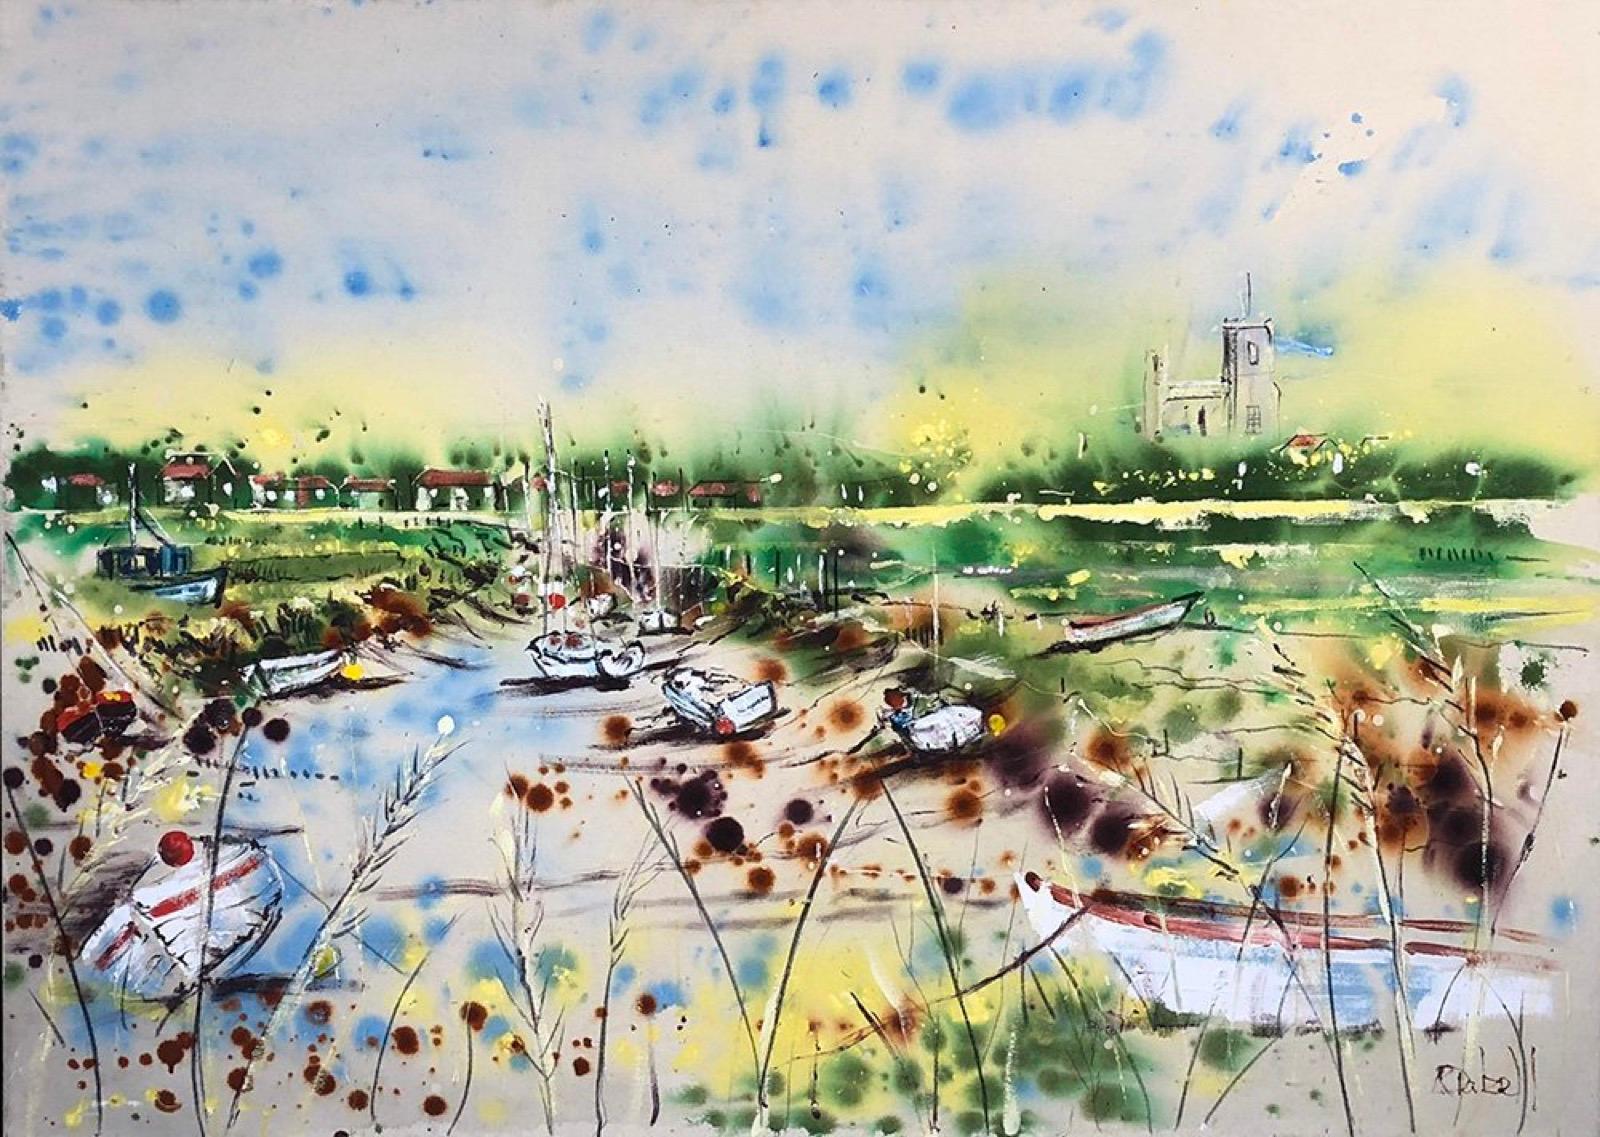 This piece is based on a view over boats on the marshes in early spring.

Rachael’s paintings are large, colourful and expressive.  Her free and lively use of paint through various techniques,  mean that Rachael’s work is as much about mood as it is